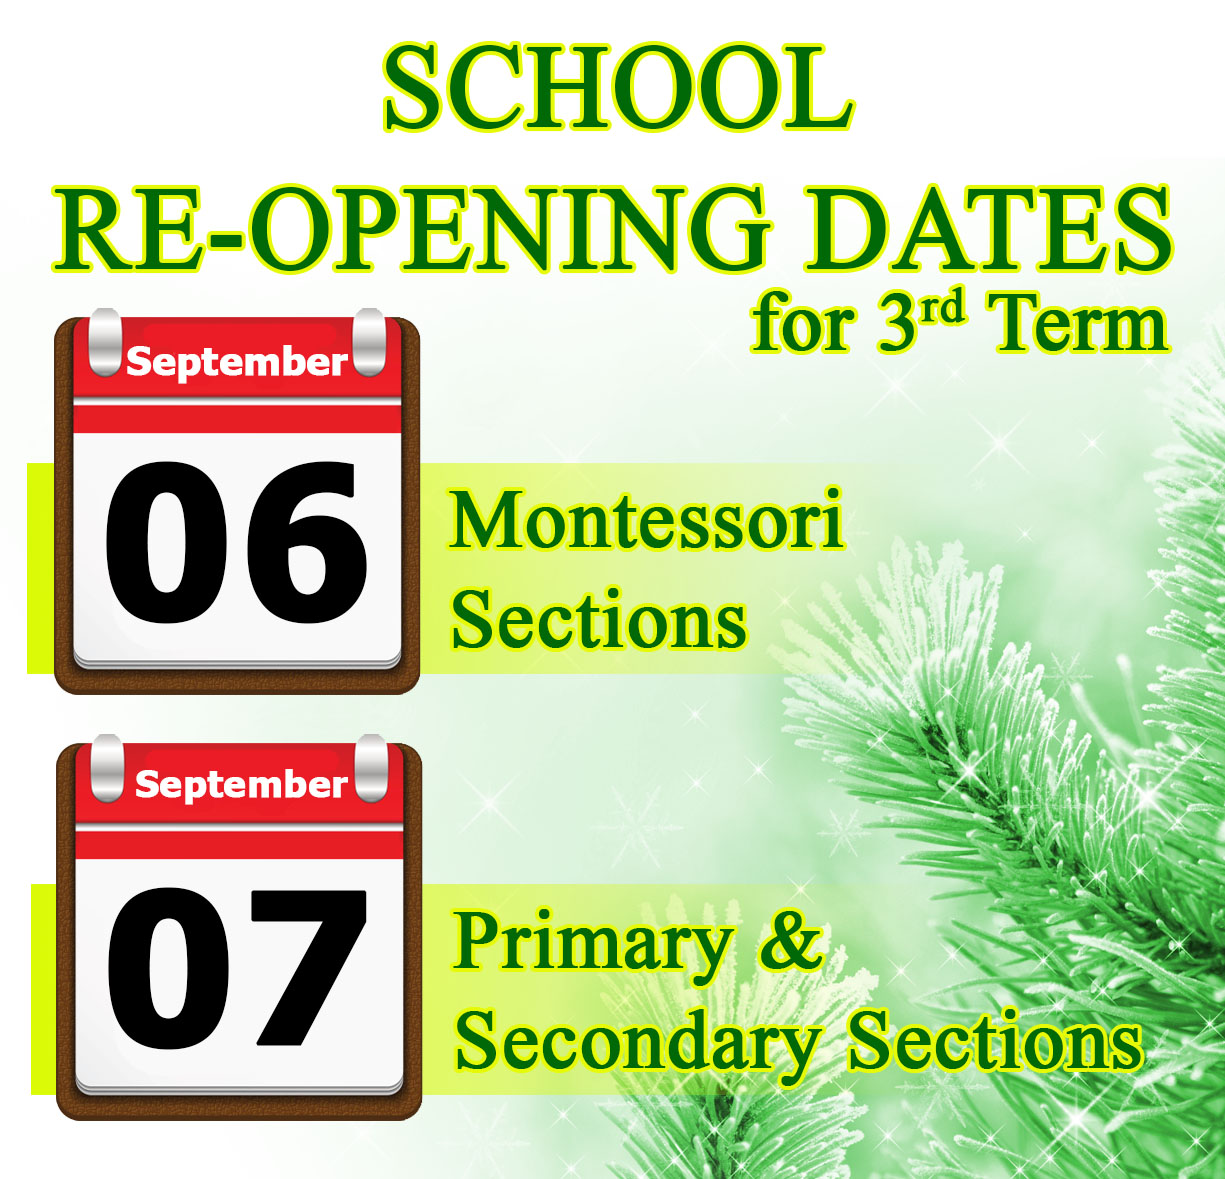 school reopening for 2017 3rd term